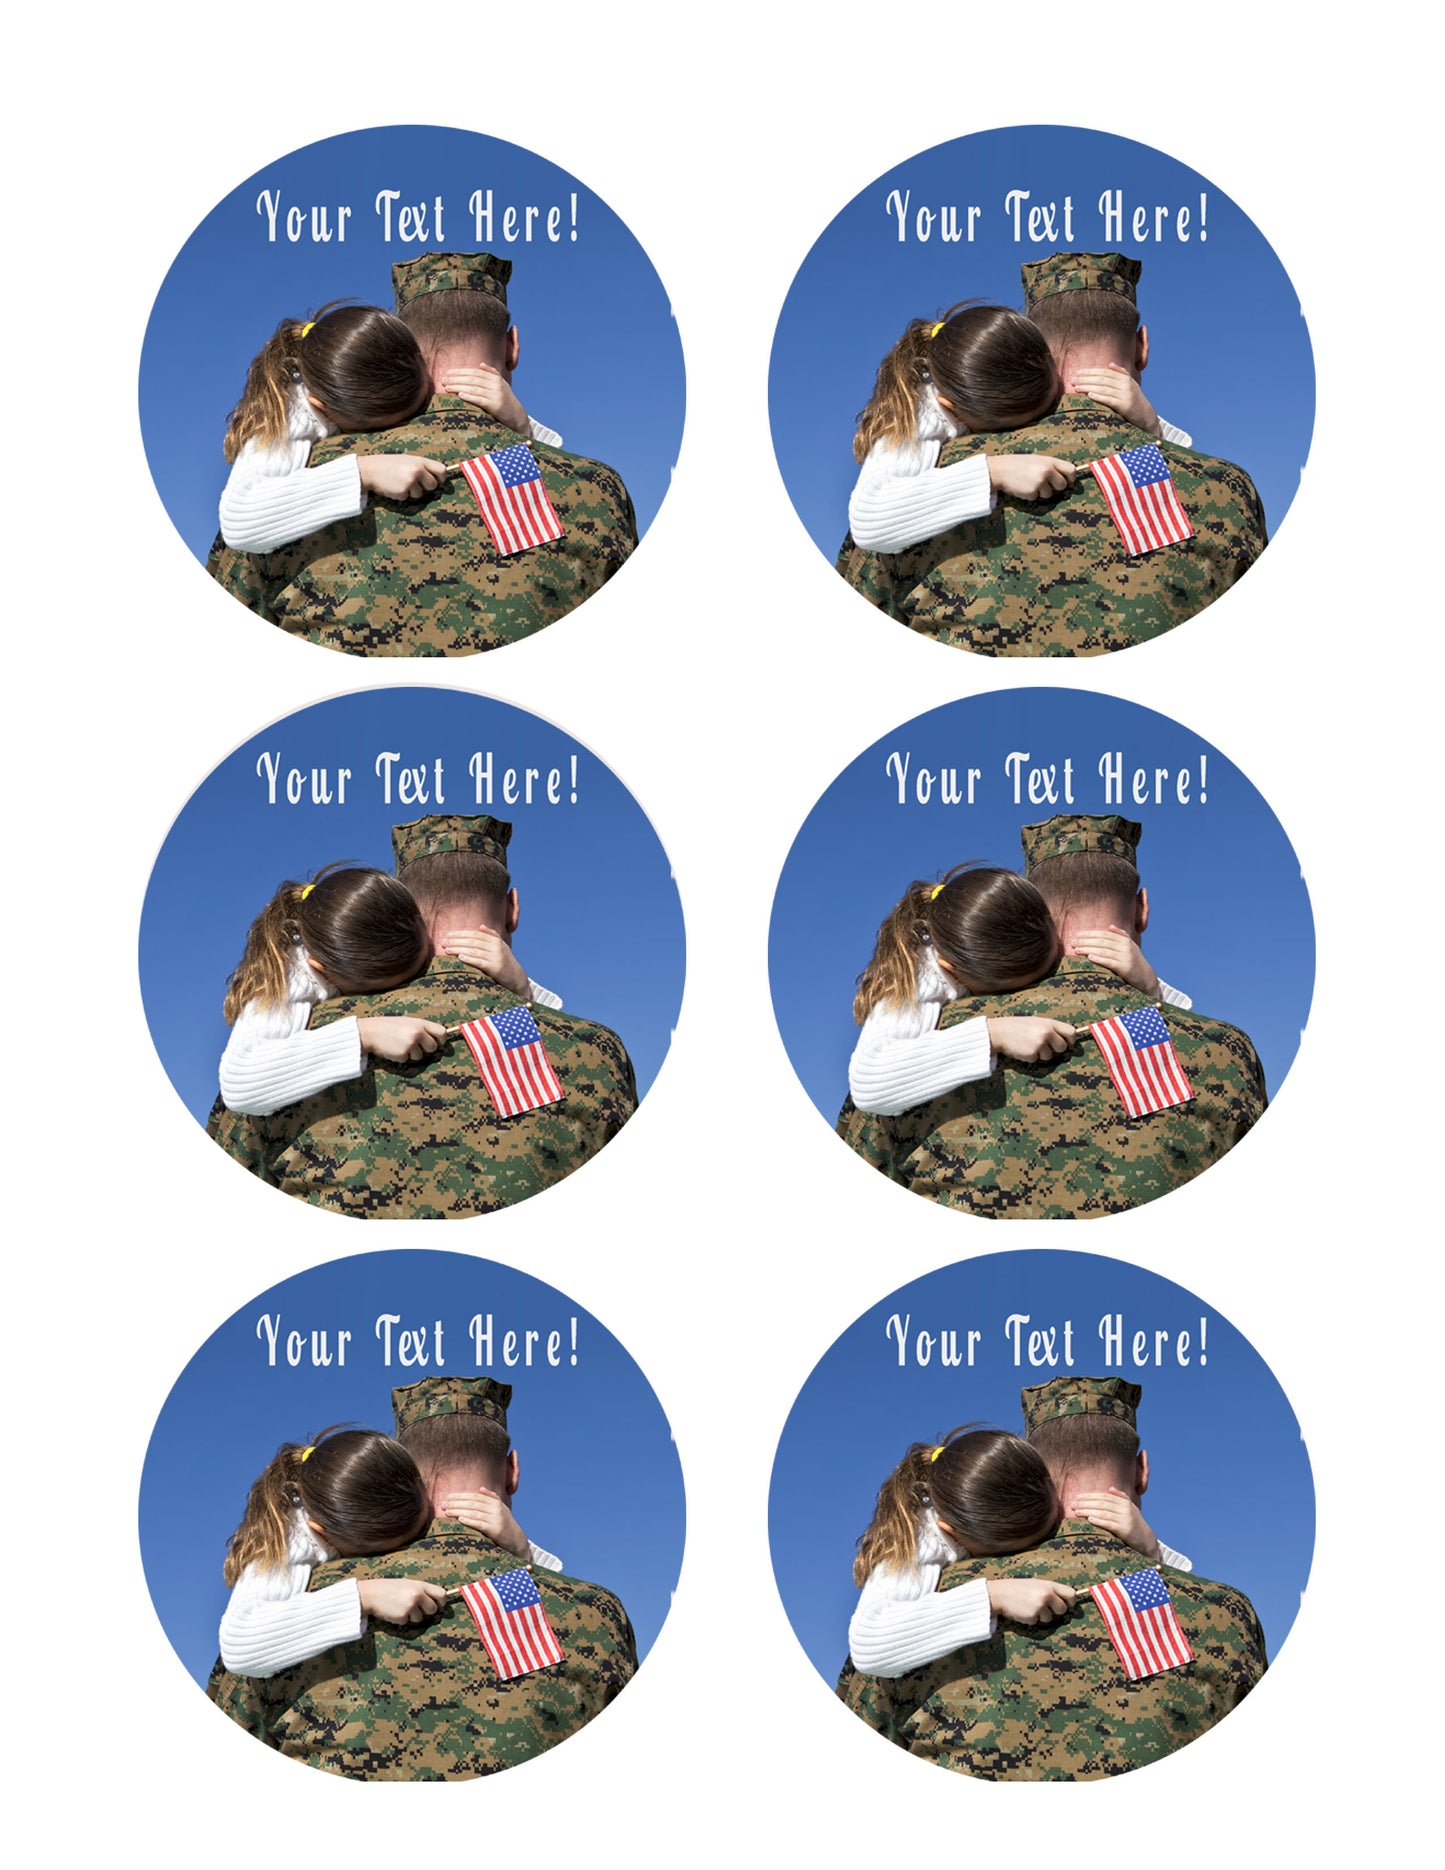 Military Man Hugs His Child - Edible Cake Topper, Cupcake Toppers, Strips